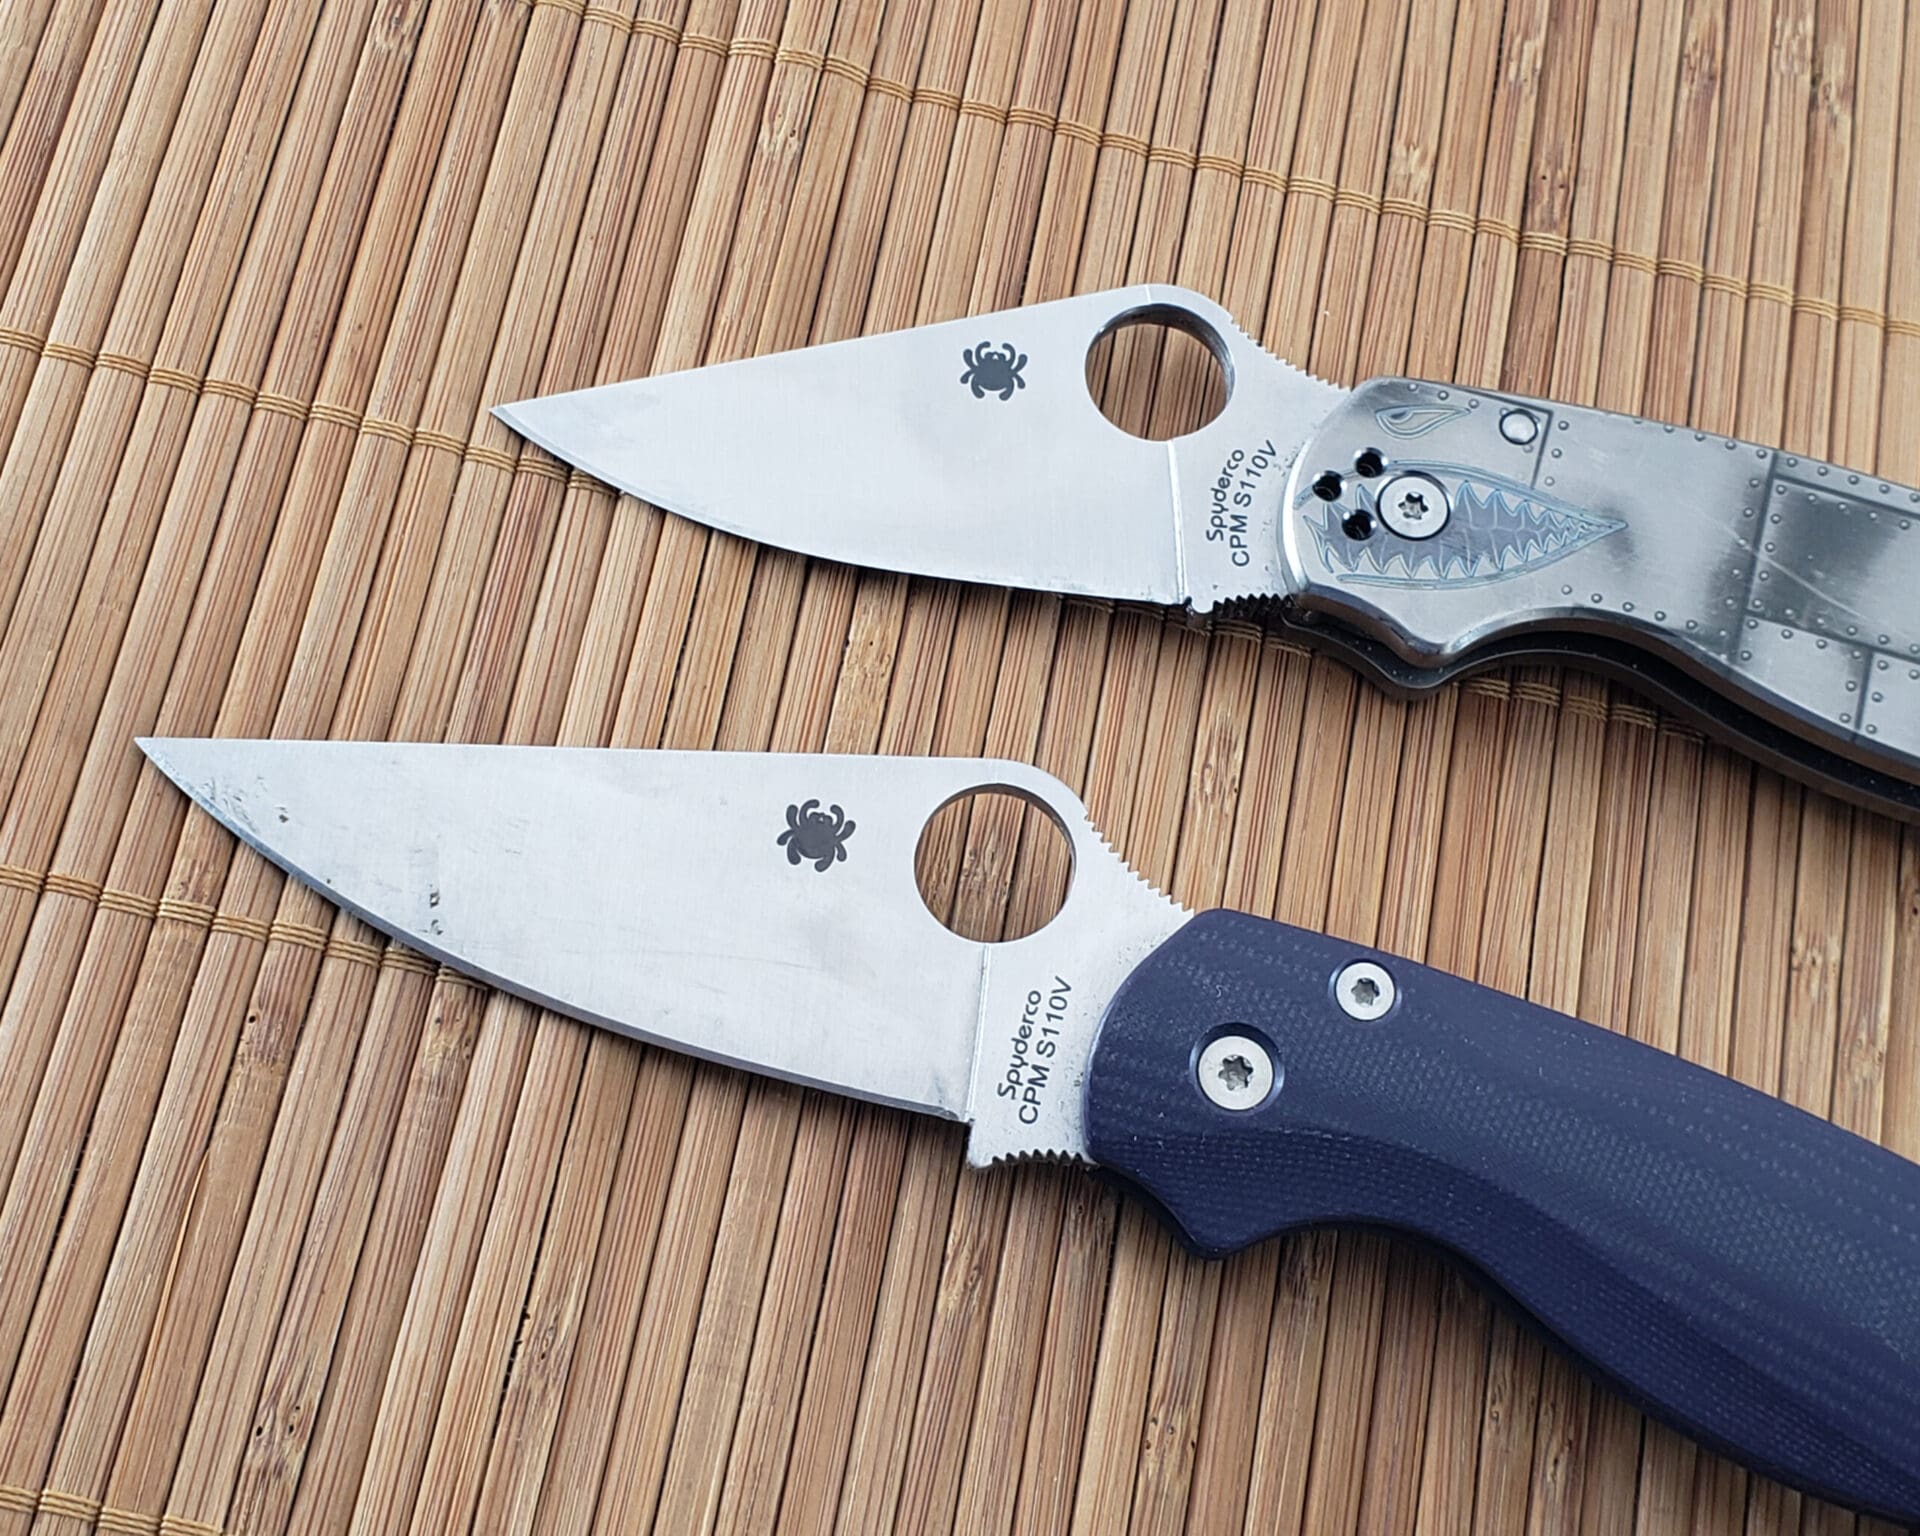 The Tactical Combat Things That Dont Suck Spyderco Paramilitary 2 and 3 Folders